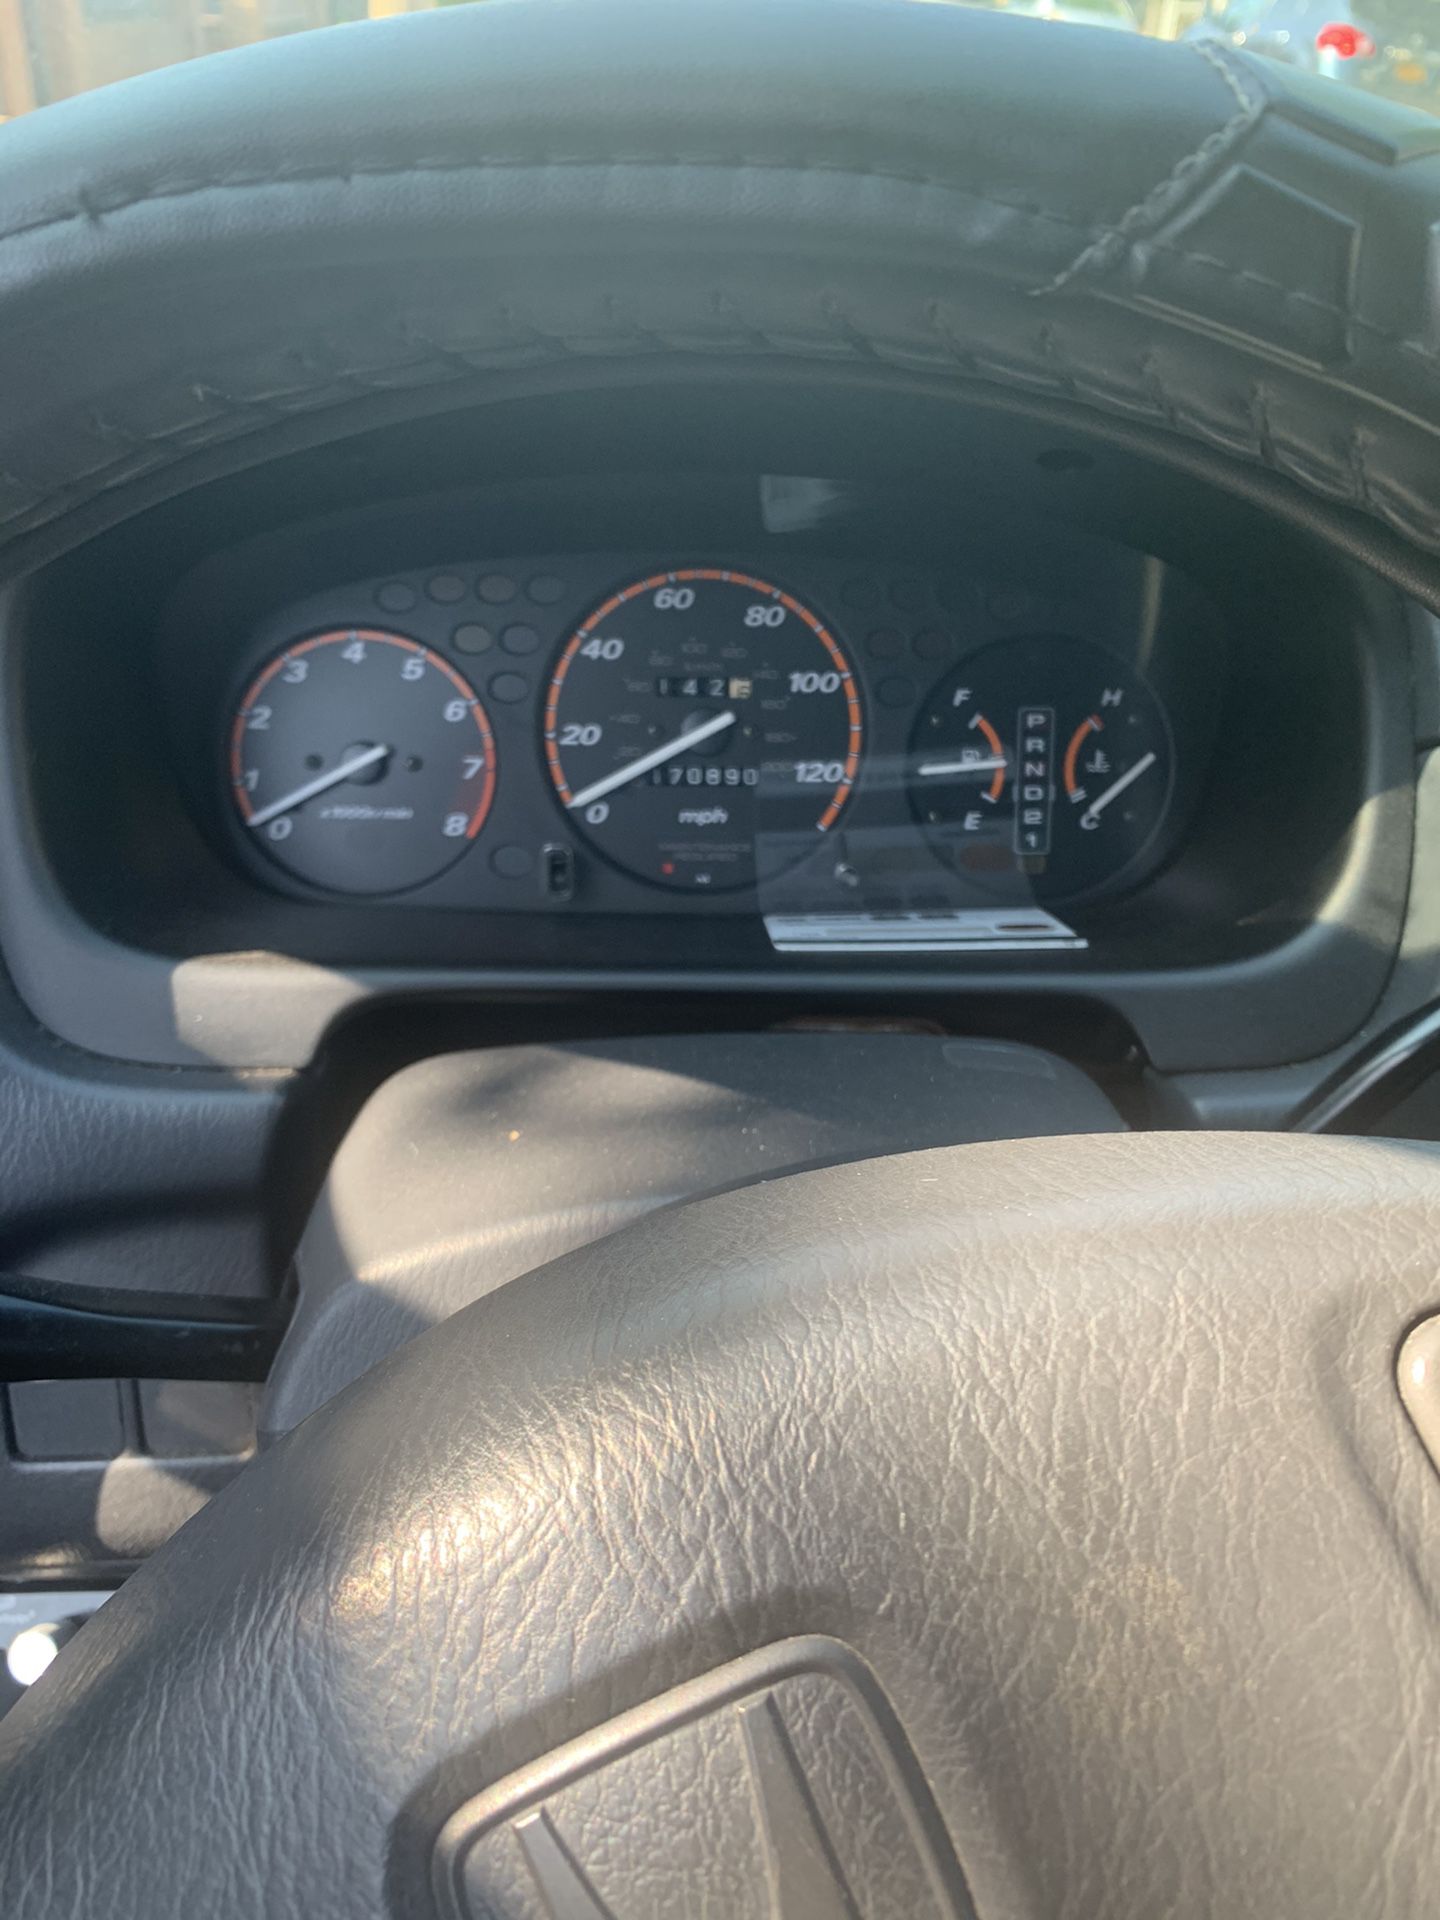 1999 honda crv clean title 170k miles the muffler is leaking a little bit no check engine only code is for the transmission sliping the code says th